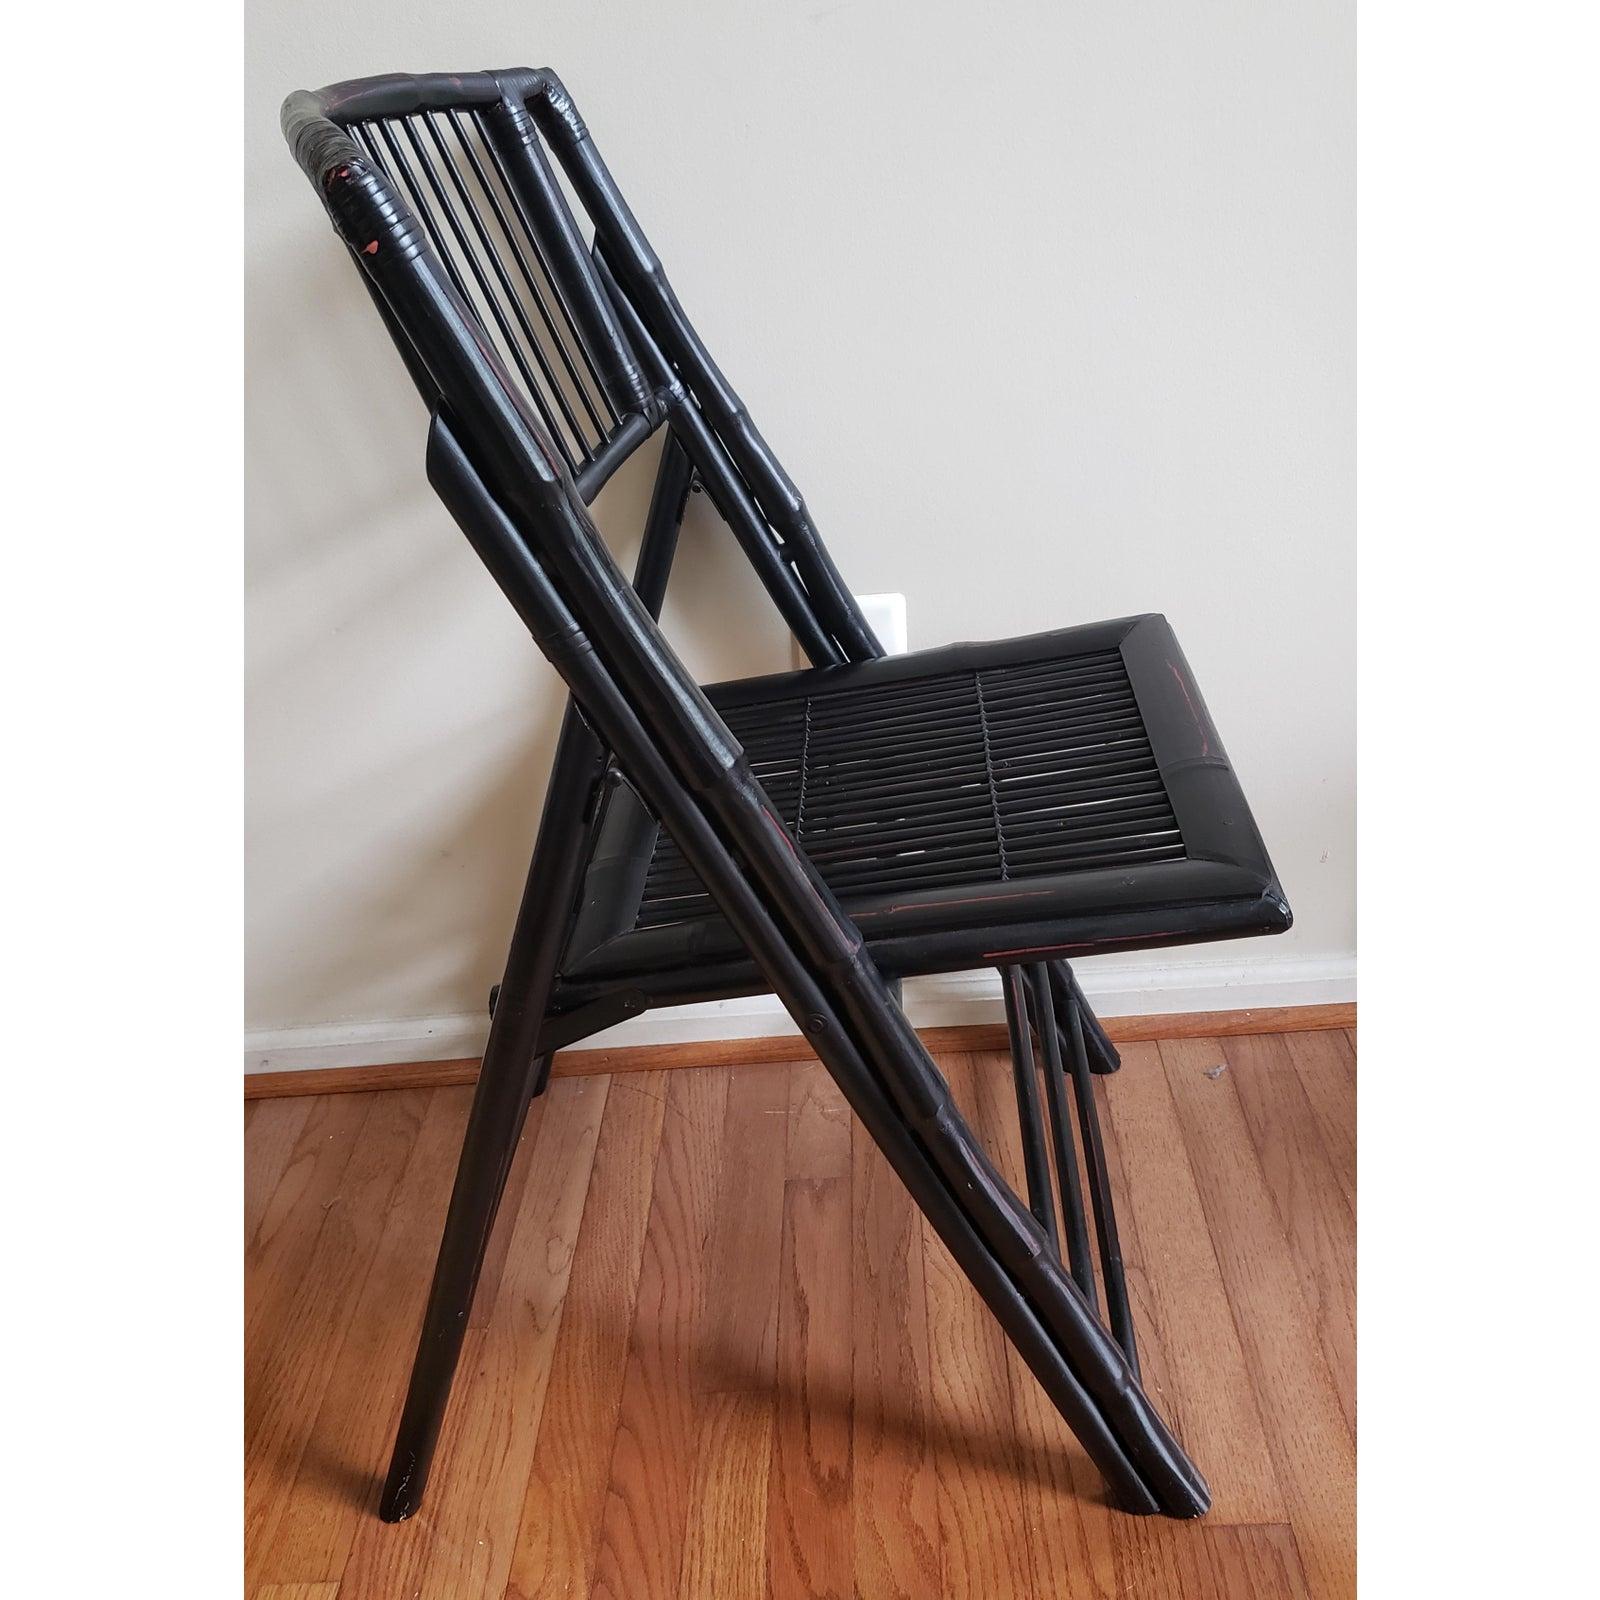 Vintage Bow Back Tortoise Bamboo Folding Chairs, a Pair For Sale 1